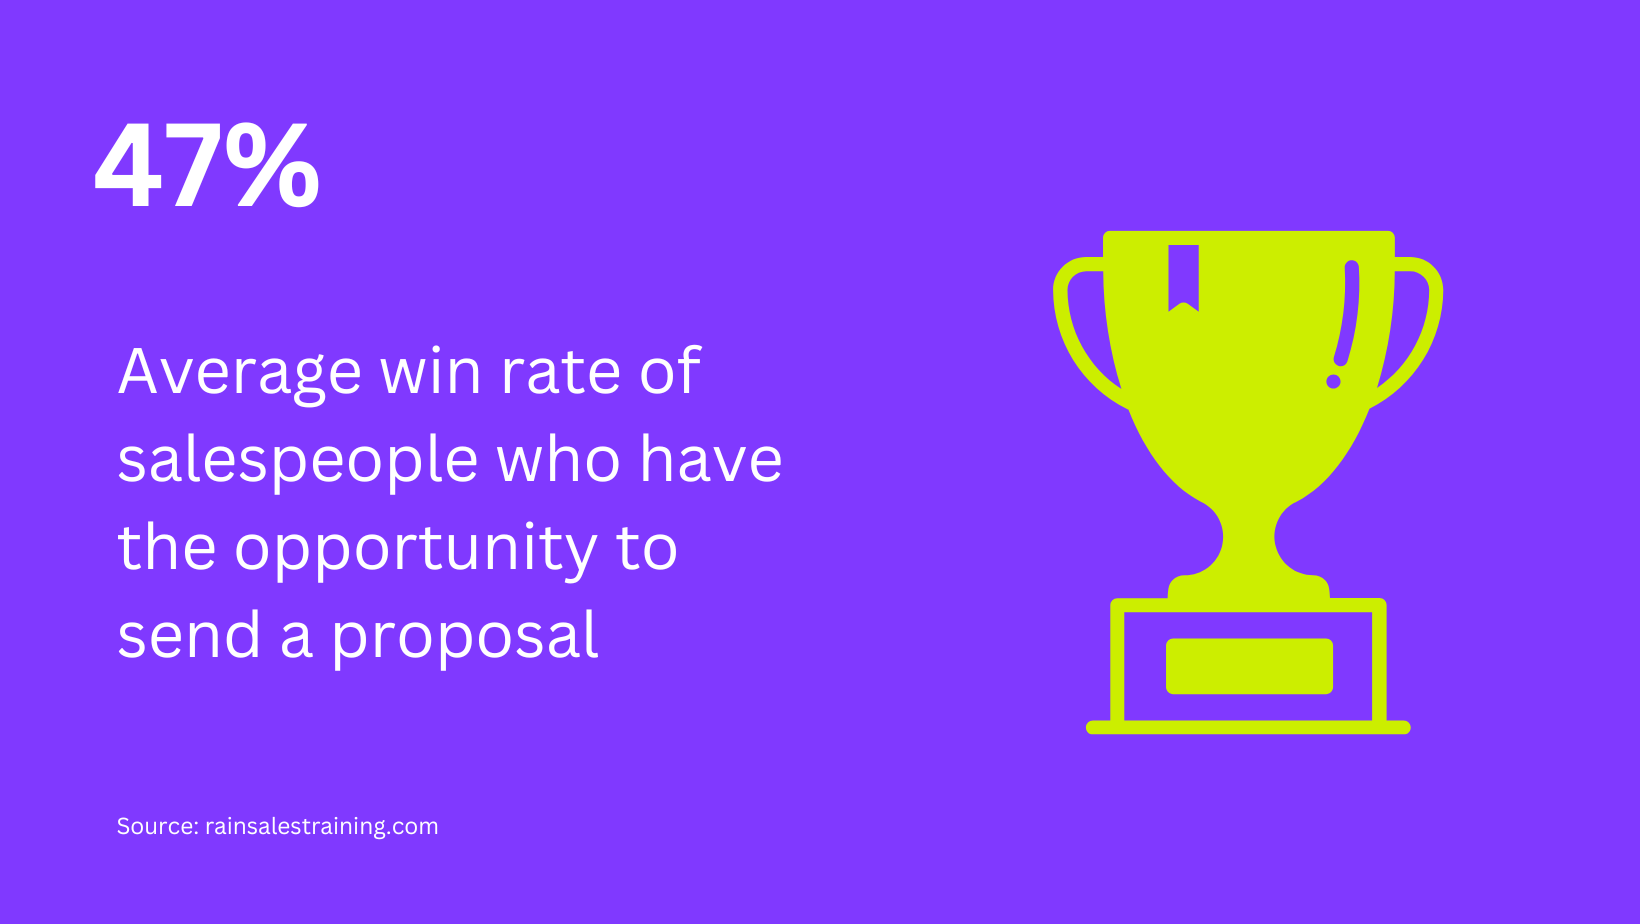 Average win rate of salespeople who have the opportunity to send a proposal